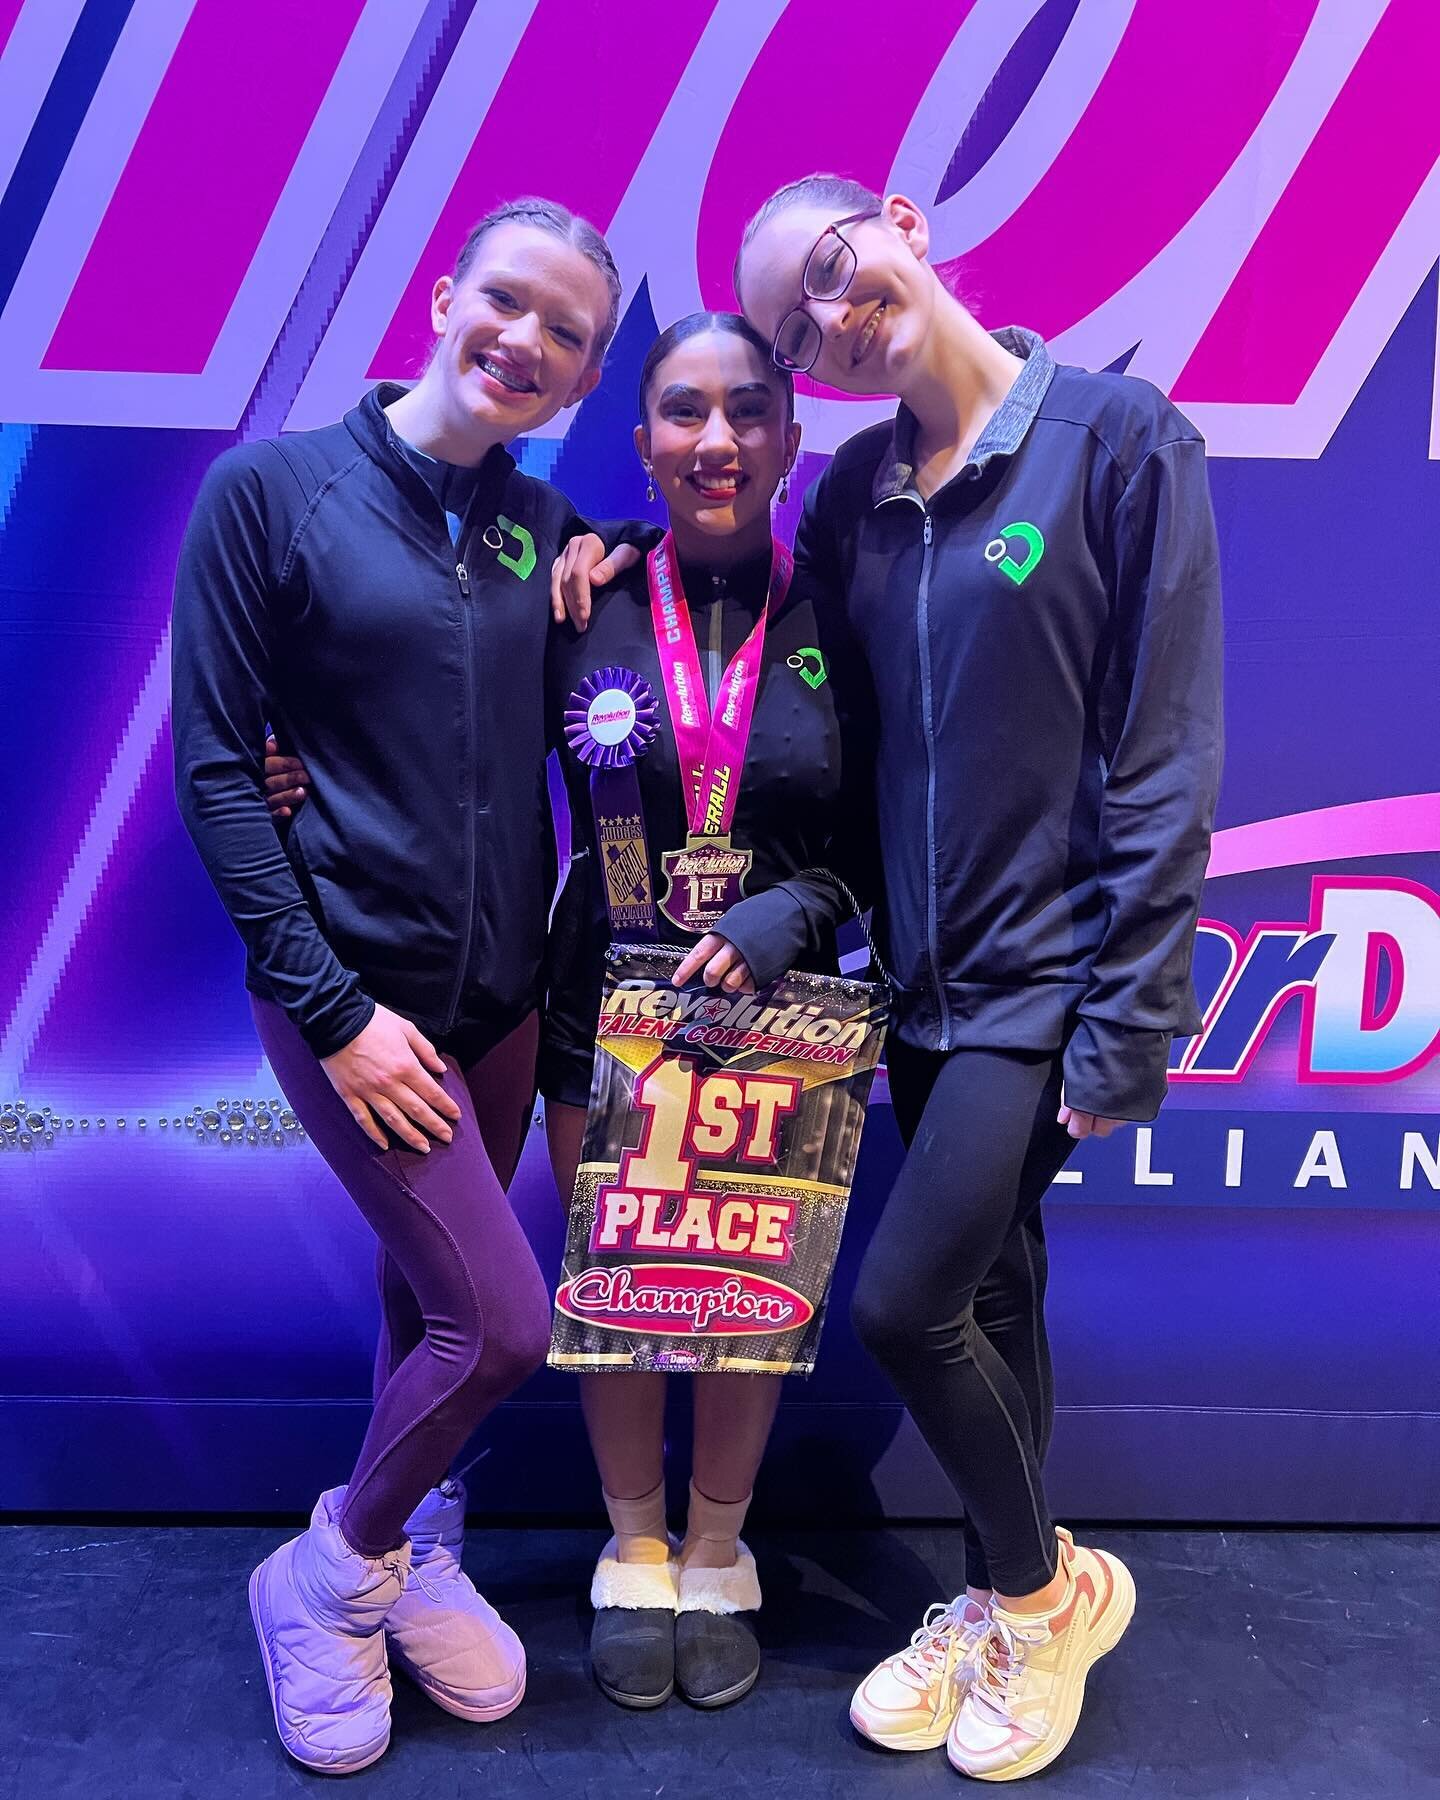 A small but exciting final awards ceremony! Congrats DI on an amazing weekend!
✨- Bird Set Free (Kimora): simply stunning special award, platinum, category 1st, 1st overall Level 1 Solos 15-19